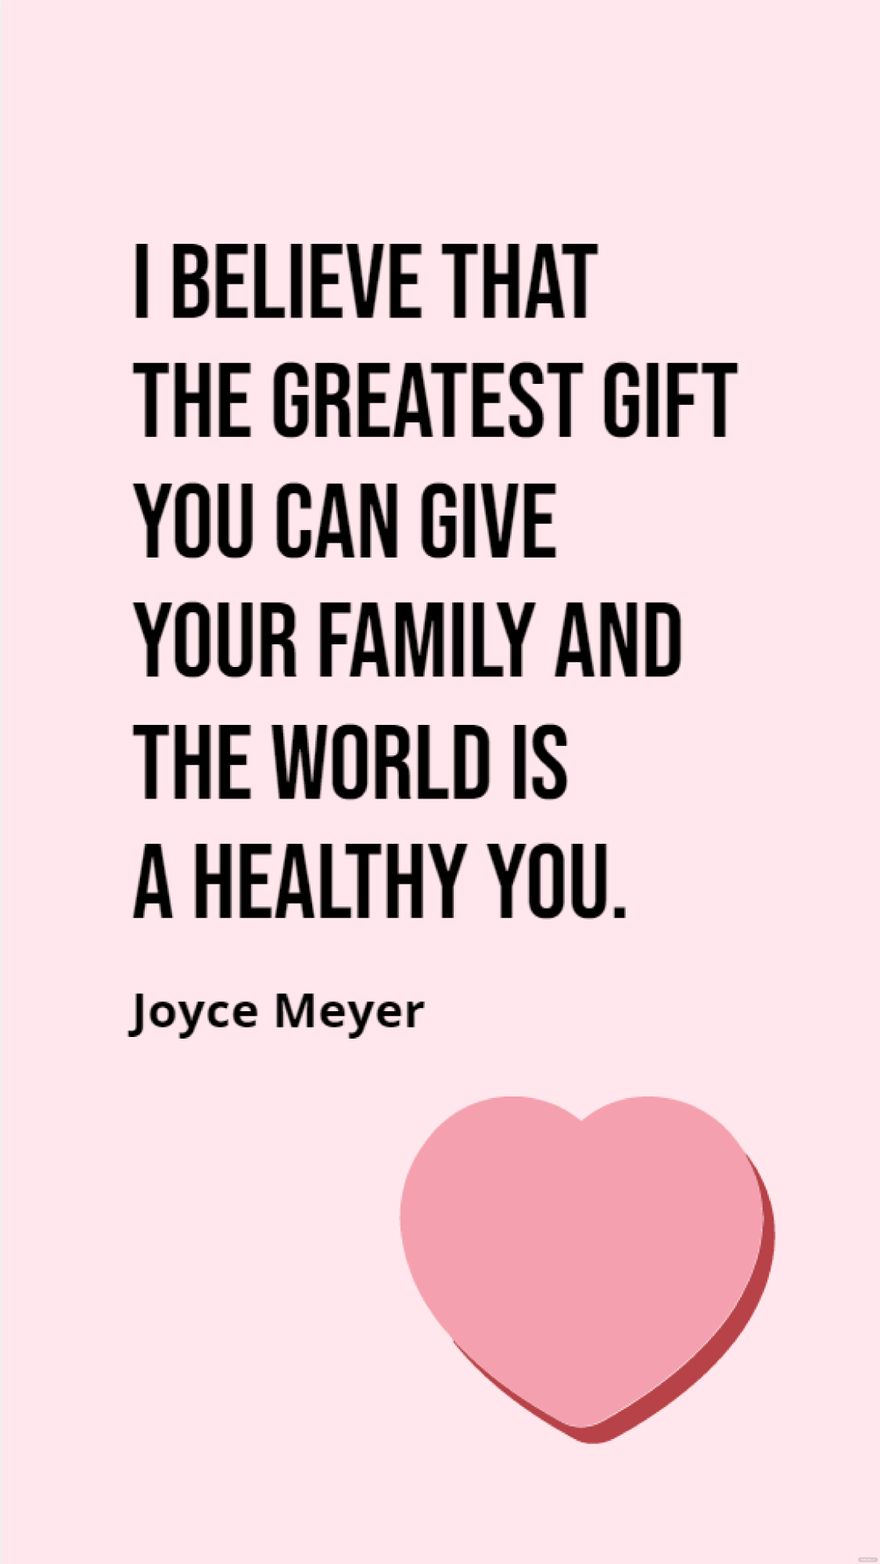 Joyce Meyer - I believe that the greatest gift you can give your family and the world is a healthy you.